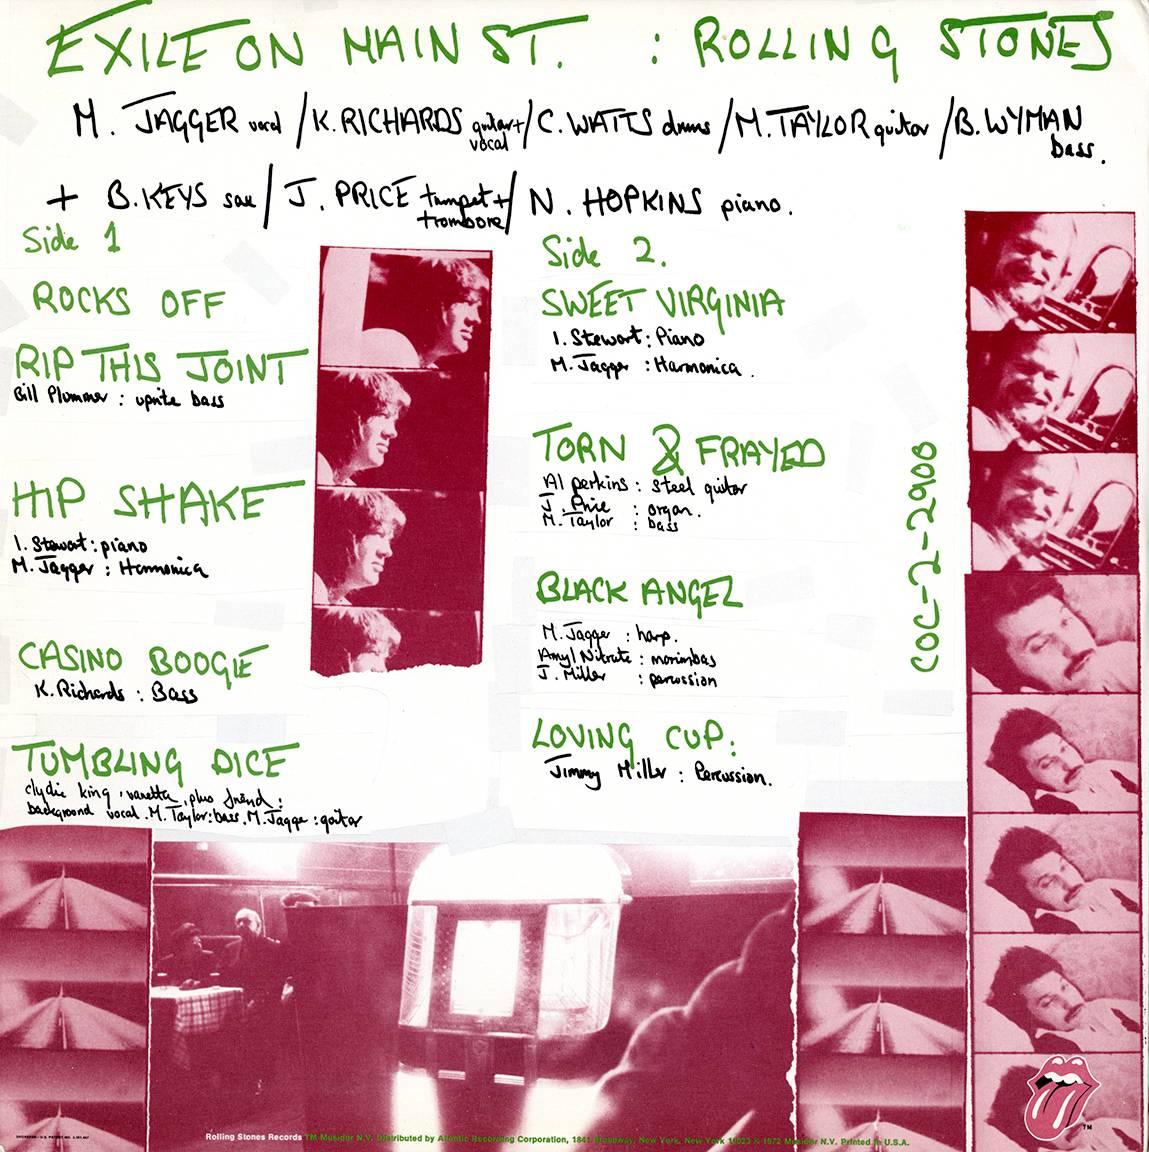 Original Rolling Stones Exile on Main Street Vinyl Record 'First Pressing' 1